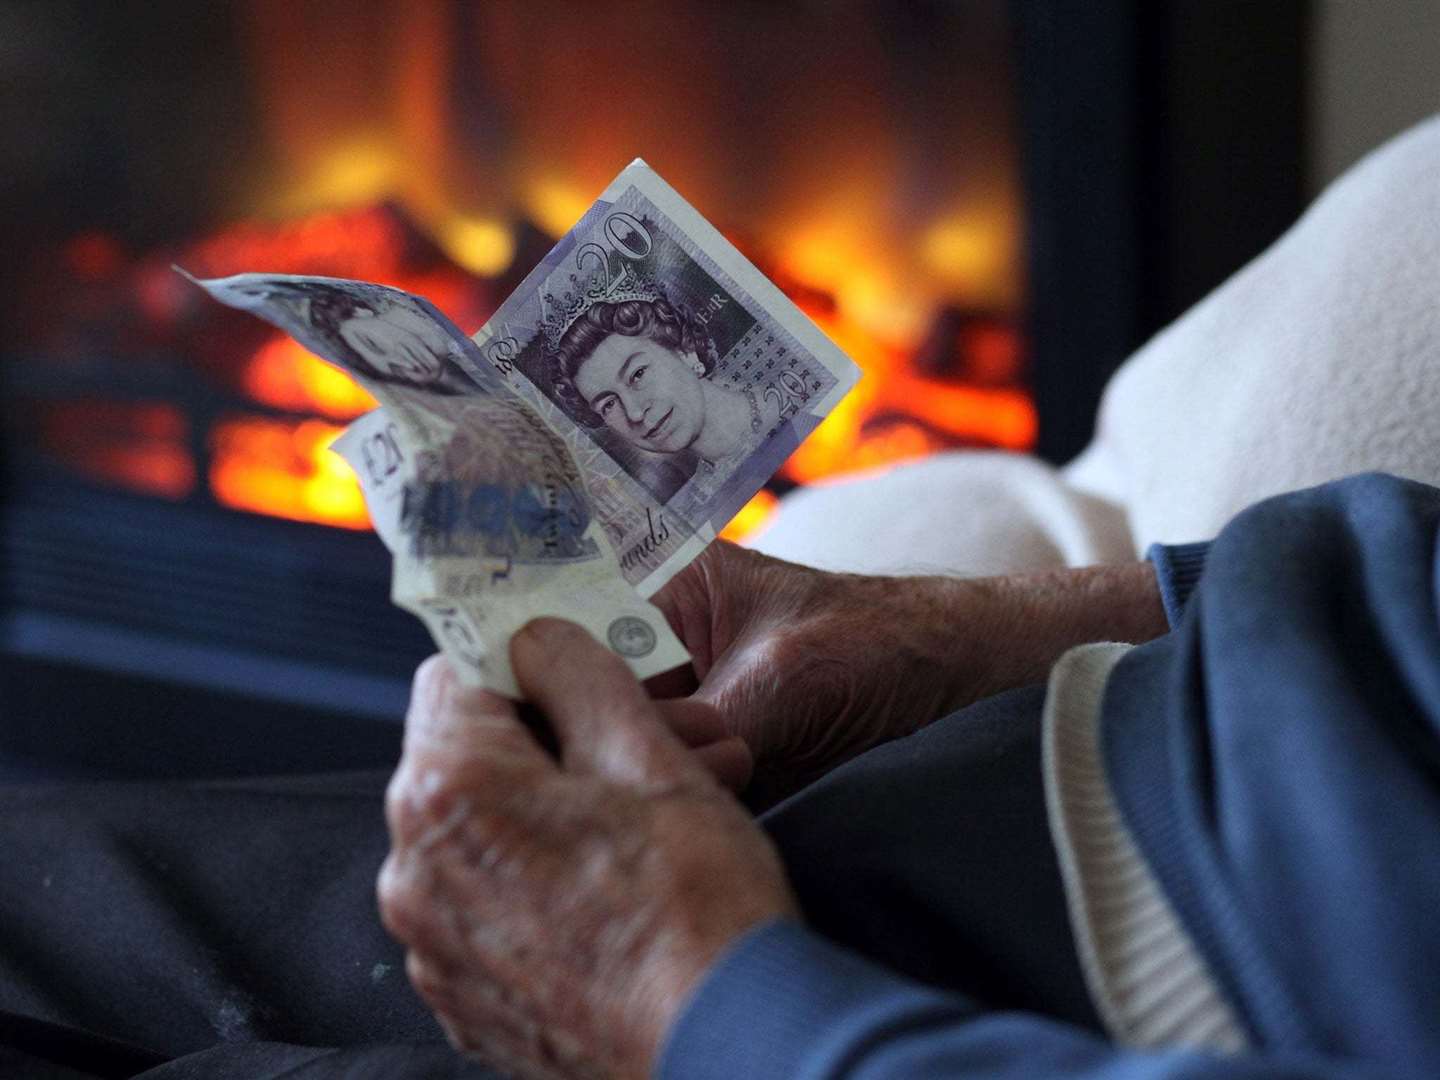 Many older people are facing tough choices as prices for energy and food rise.